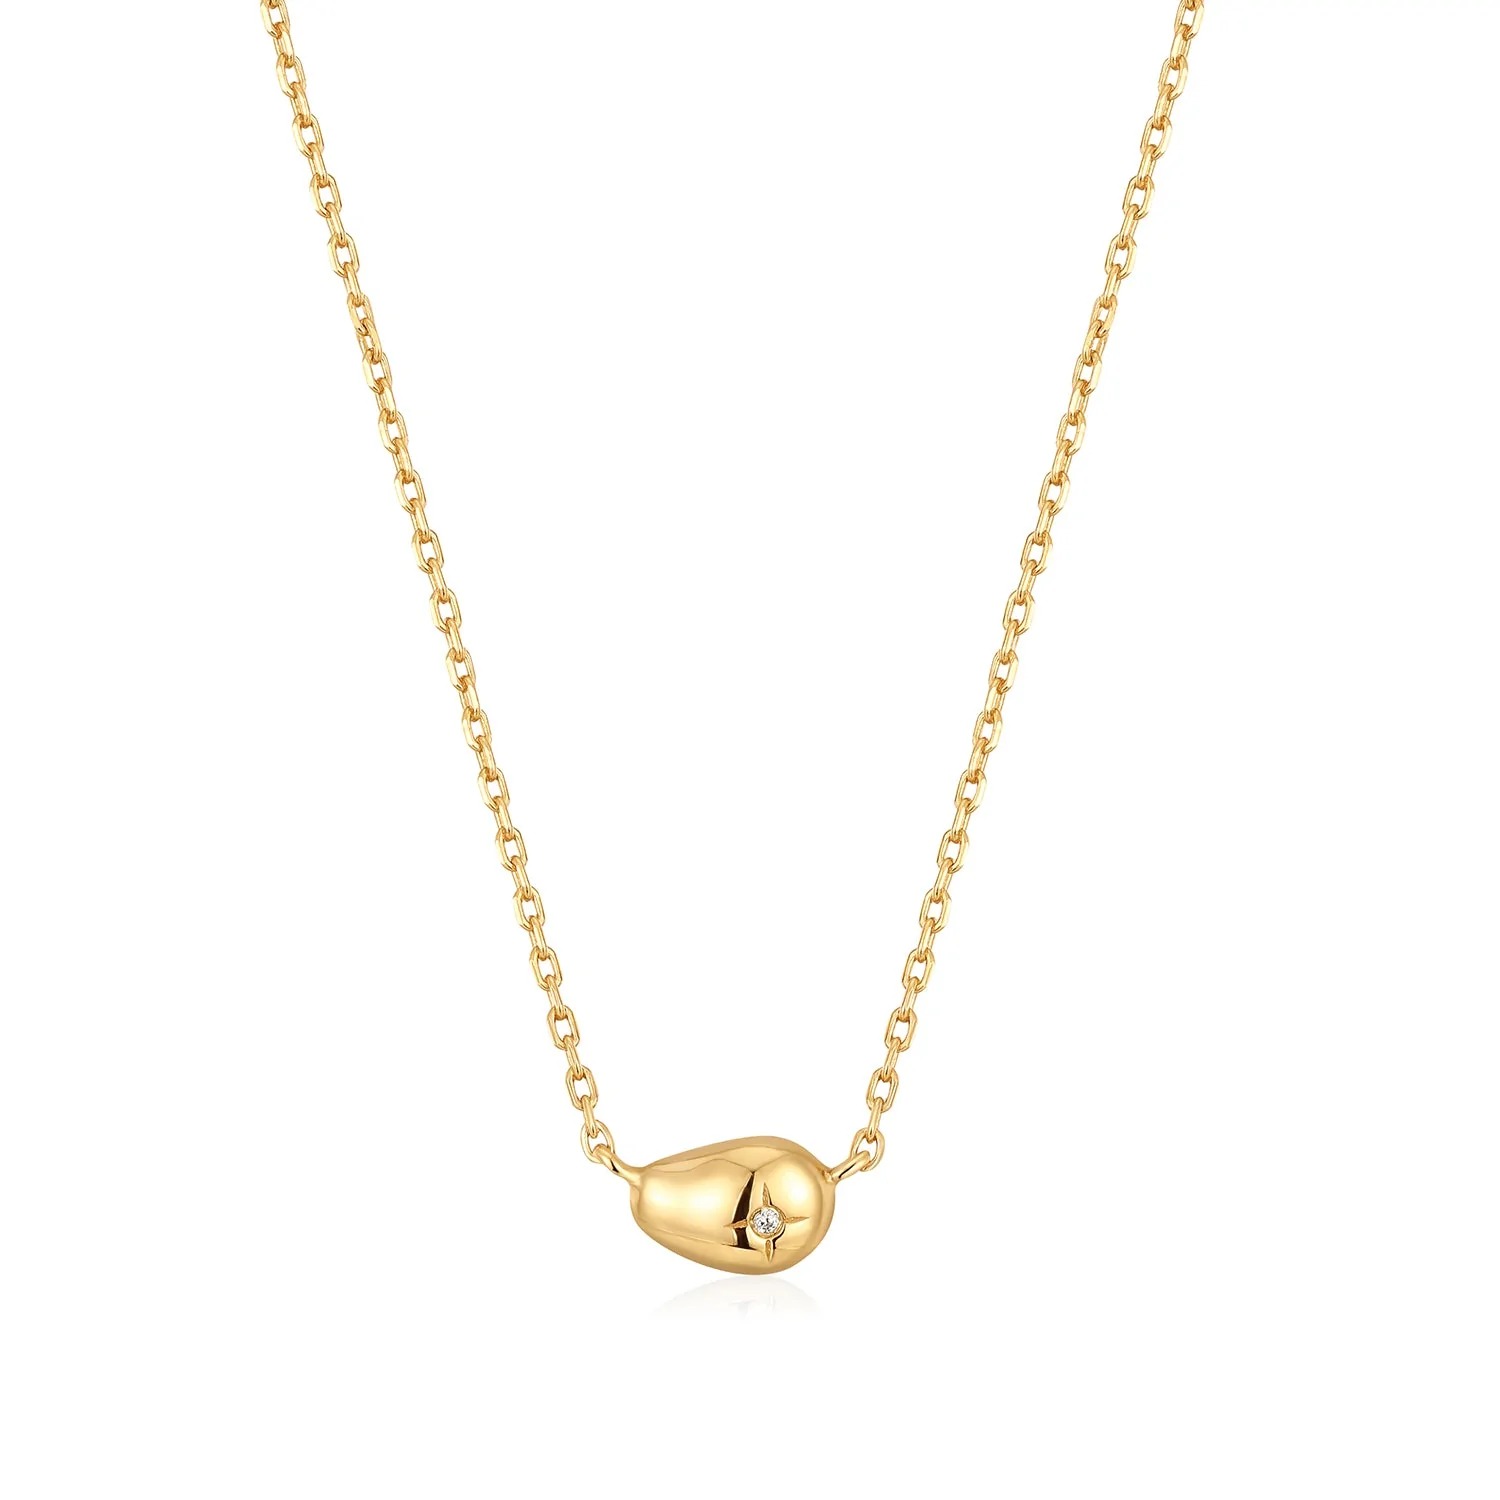 ANIA HAIE Pebble Sparkle Necklace, Gold-plate